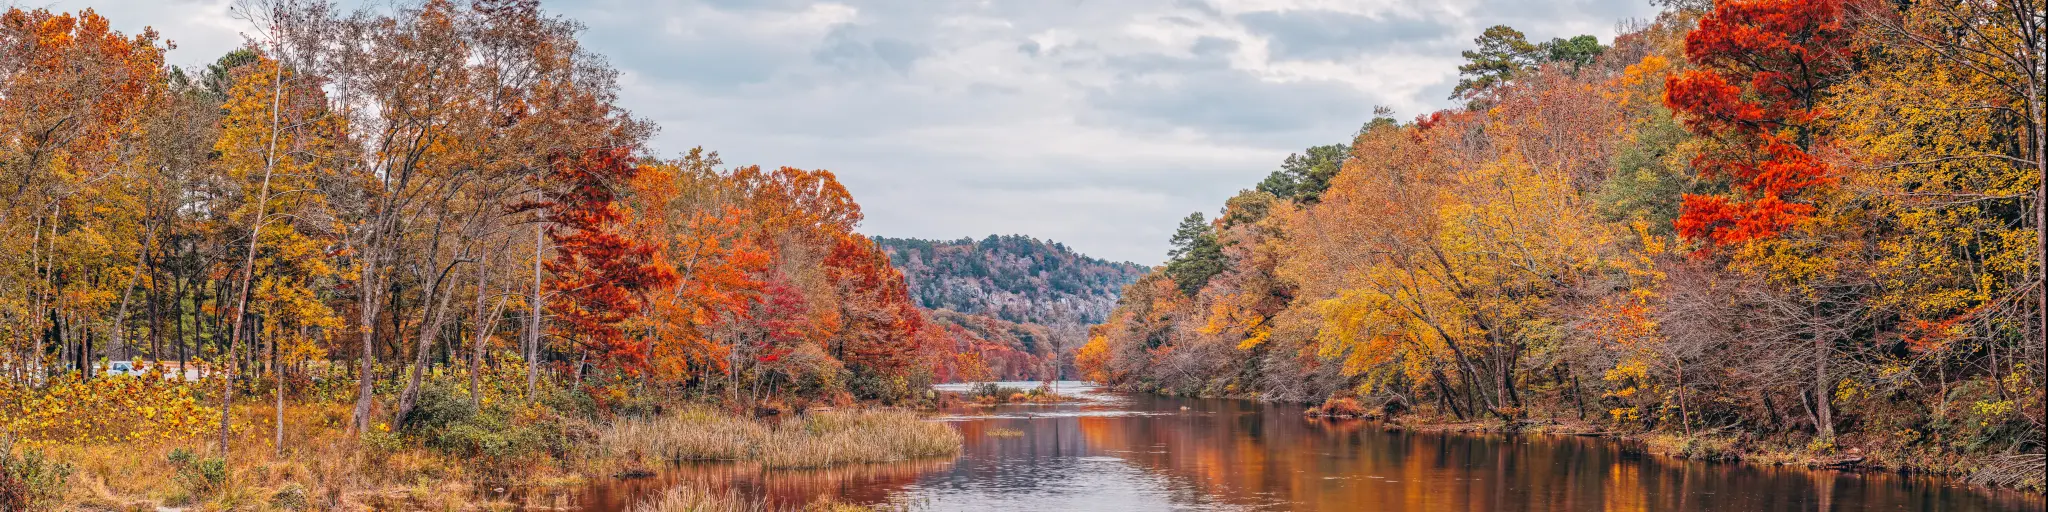 Beautiful fall leaves along the Mountain Fork River in Beavers Bend State Park, Oklahoma.